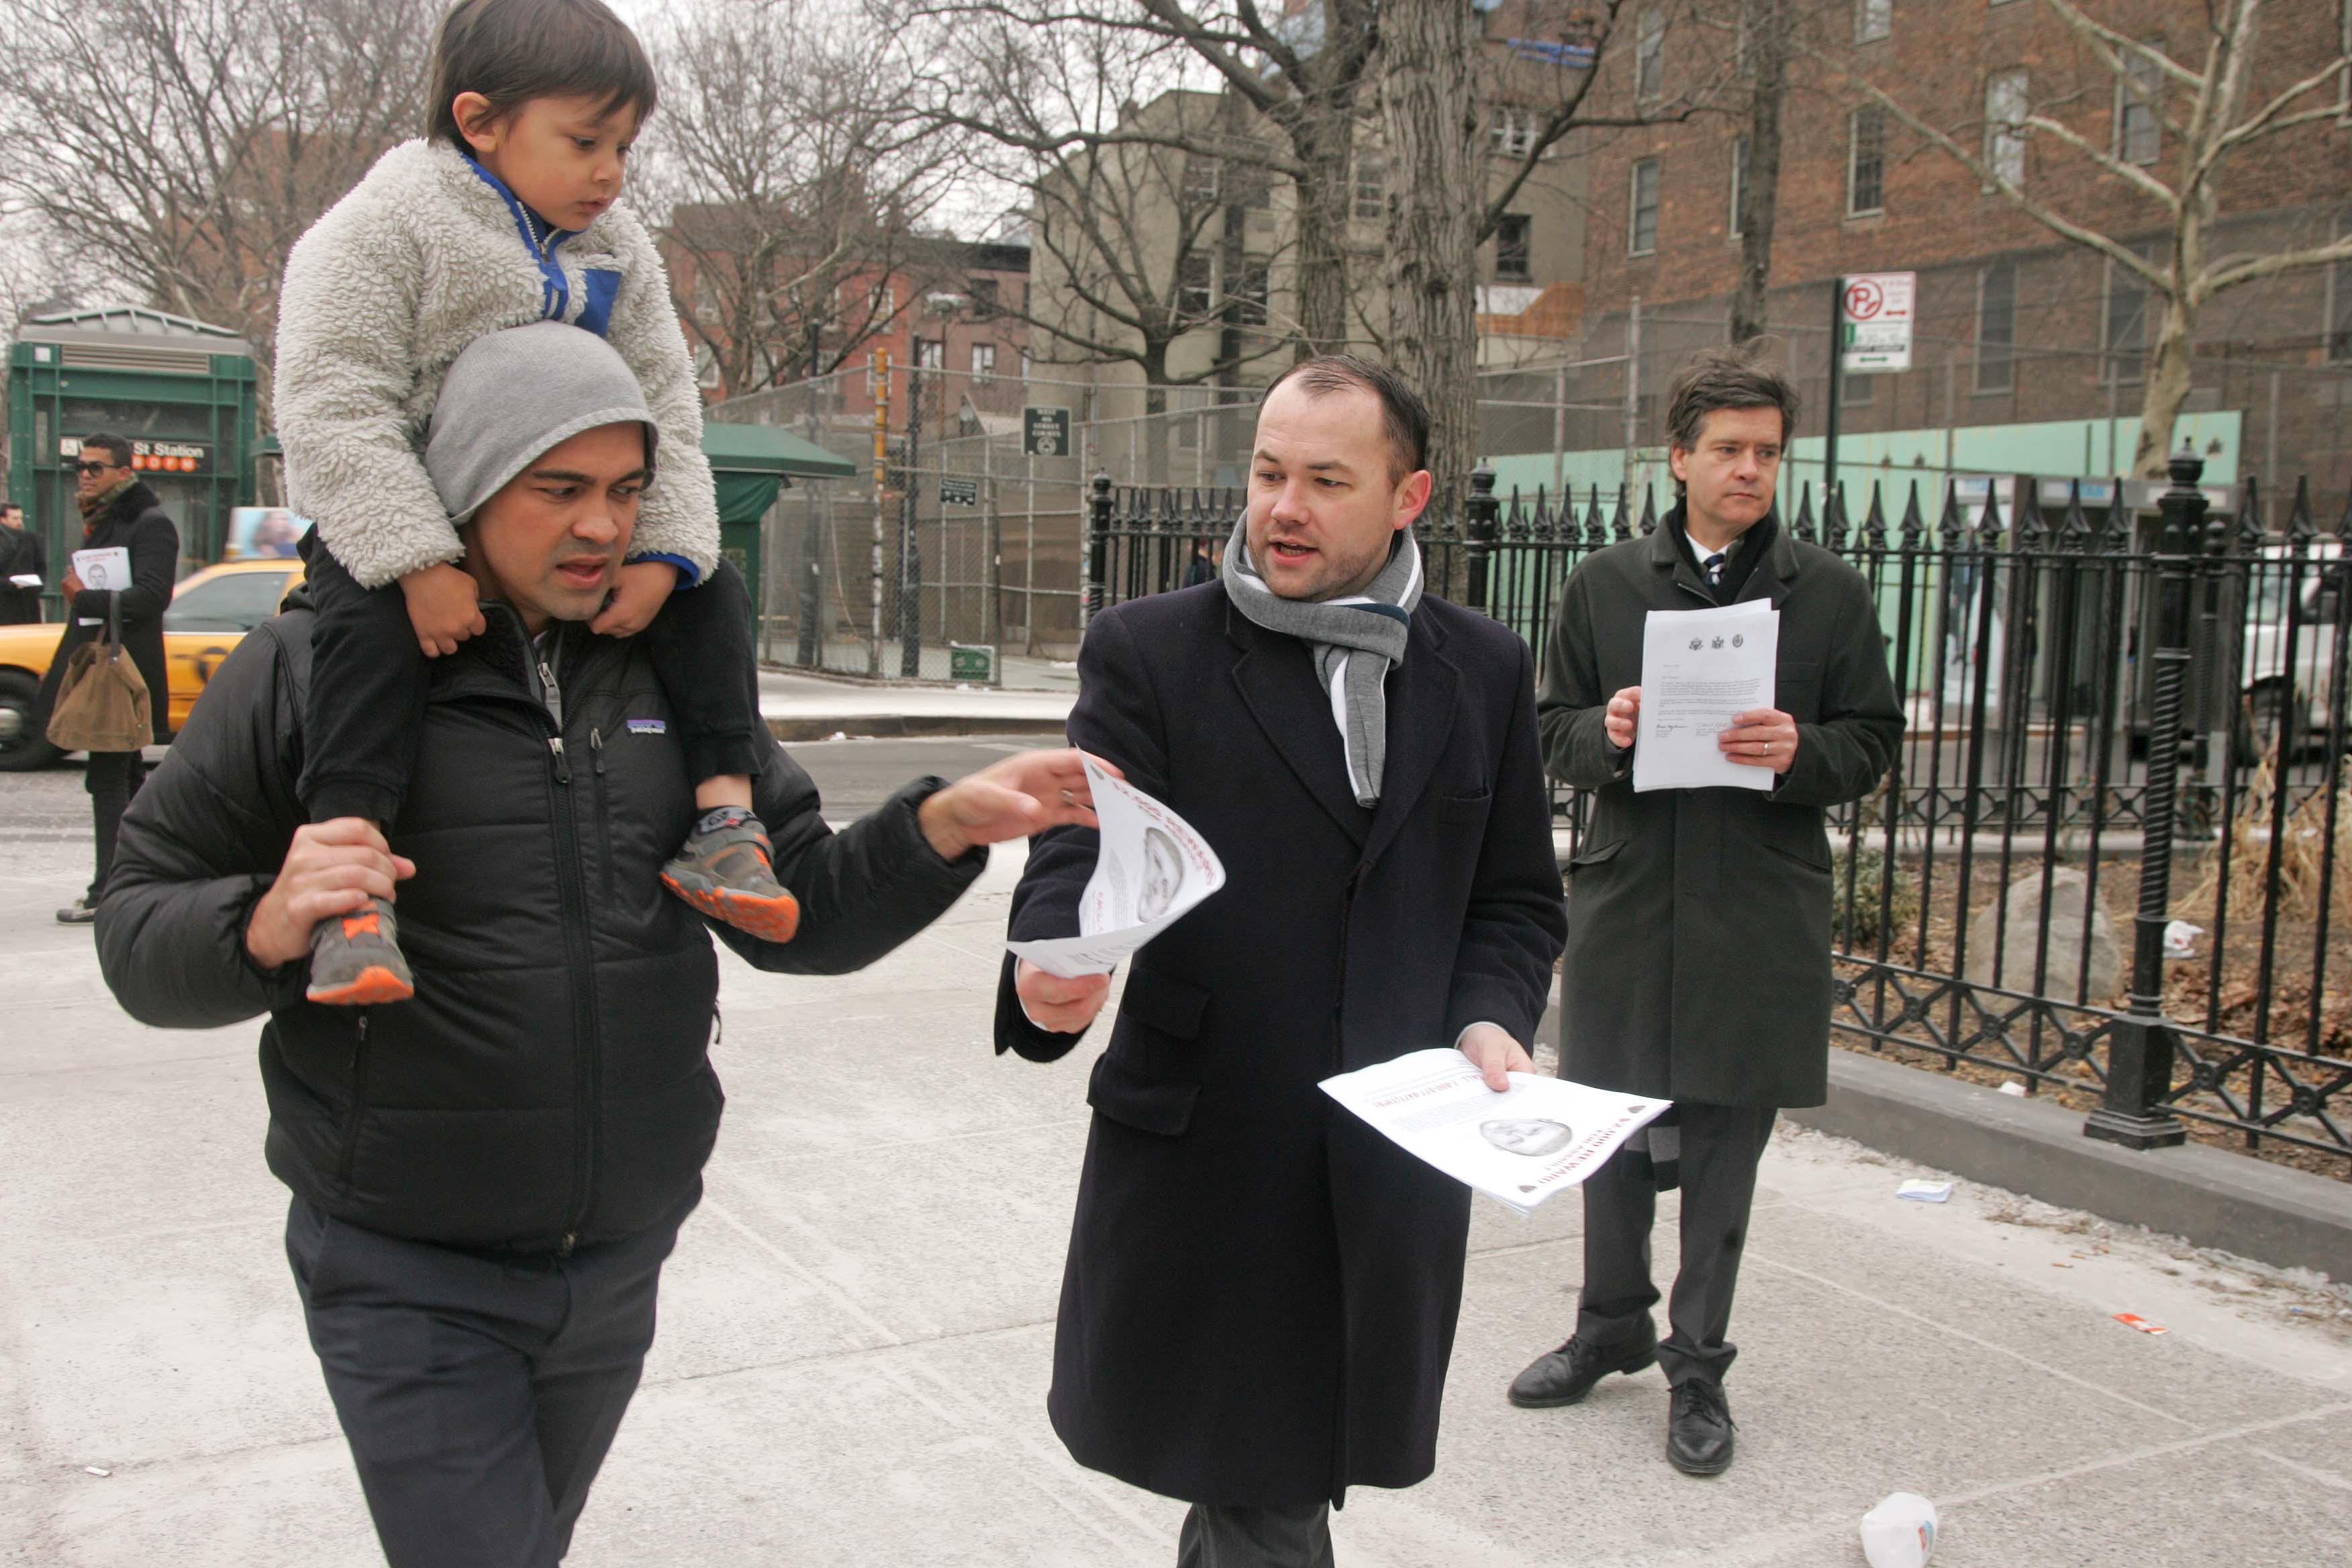 City Councilmember Corey Johnson, center, and state Senator Brad Hoylman, right, handed out fliers with the suspect's police sketch near the W. Fourth St. subway station on Friday morning.  Photo by Sam Spokony